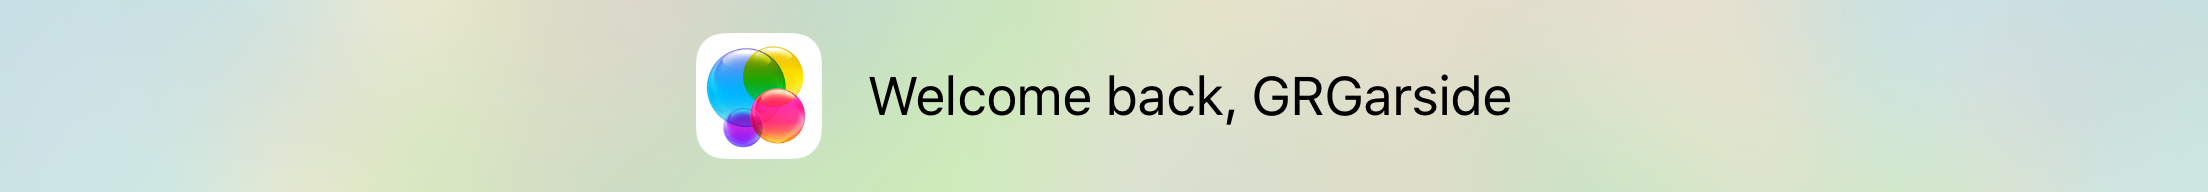 Game Center welcome back banner